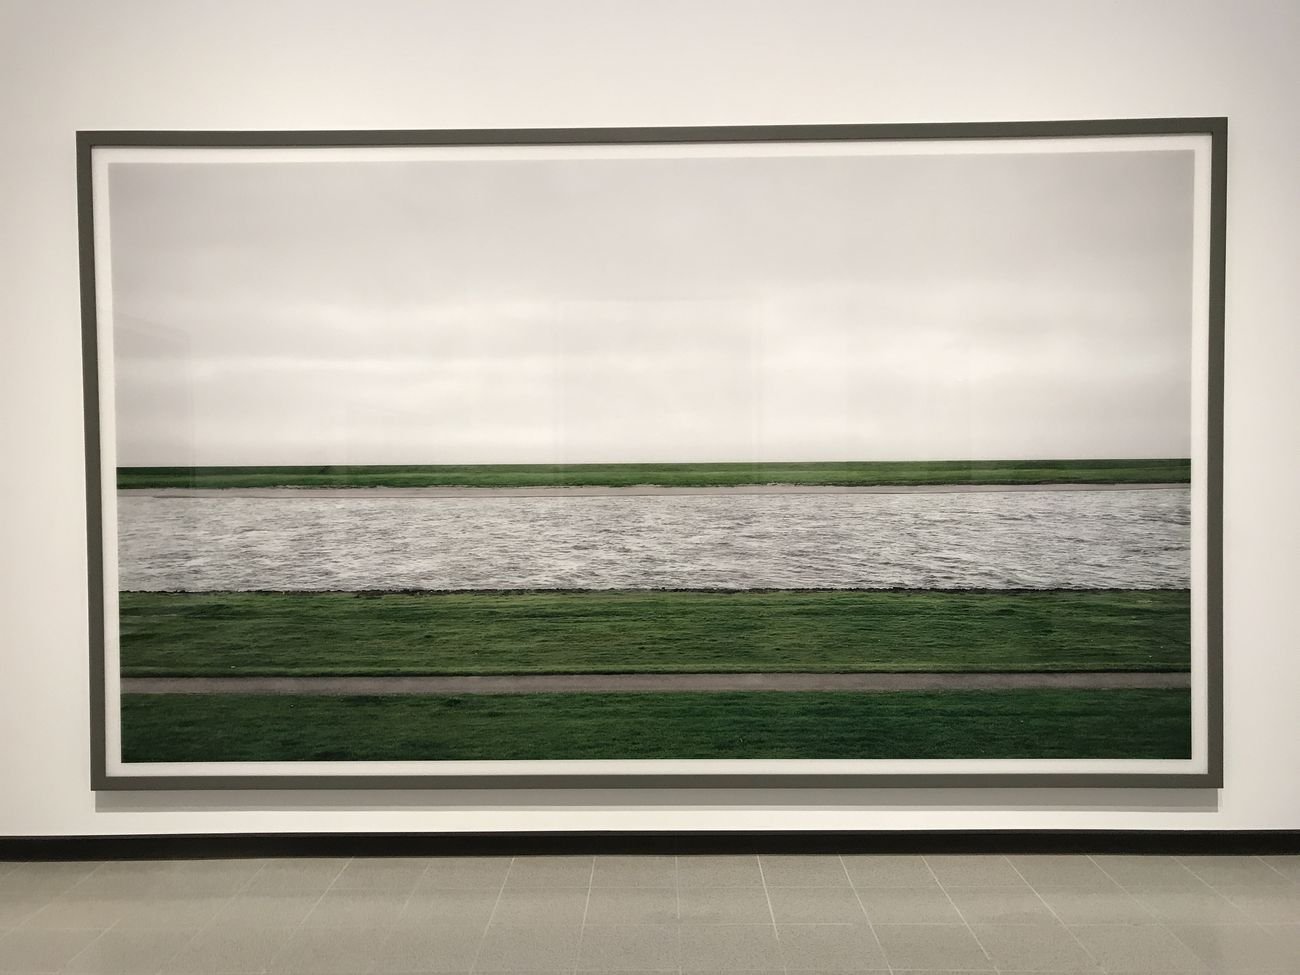 Andreas Gursky. Exhibition view at Hayward Gallery, Londra 2018